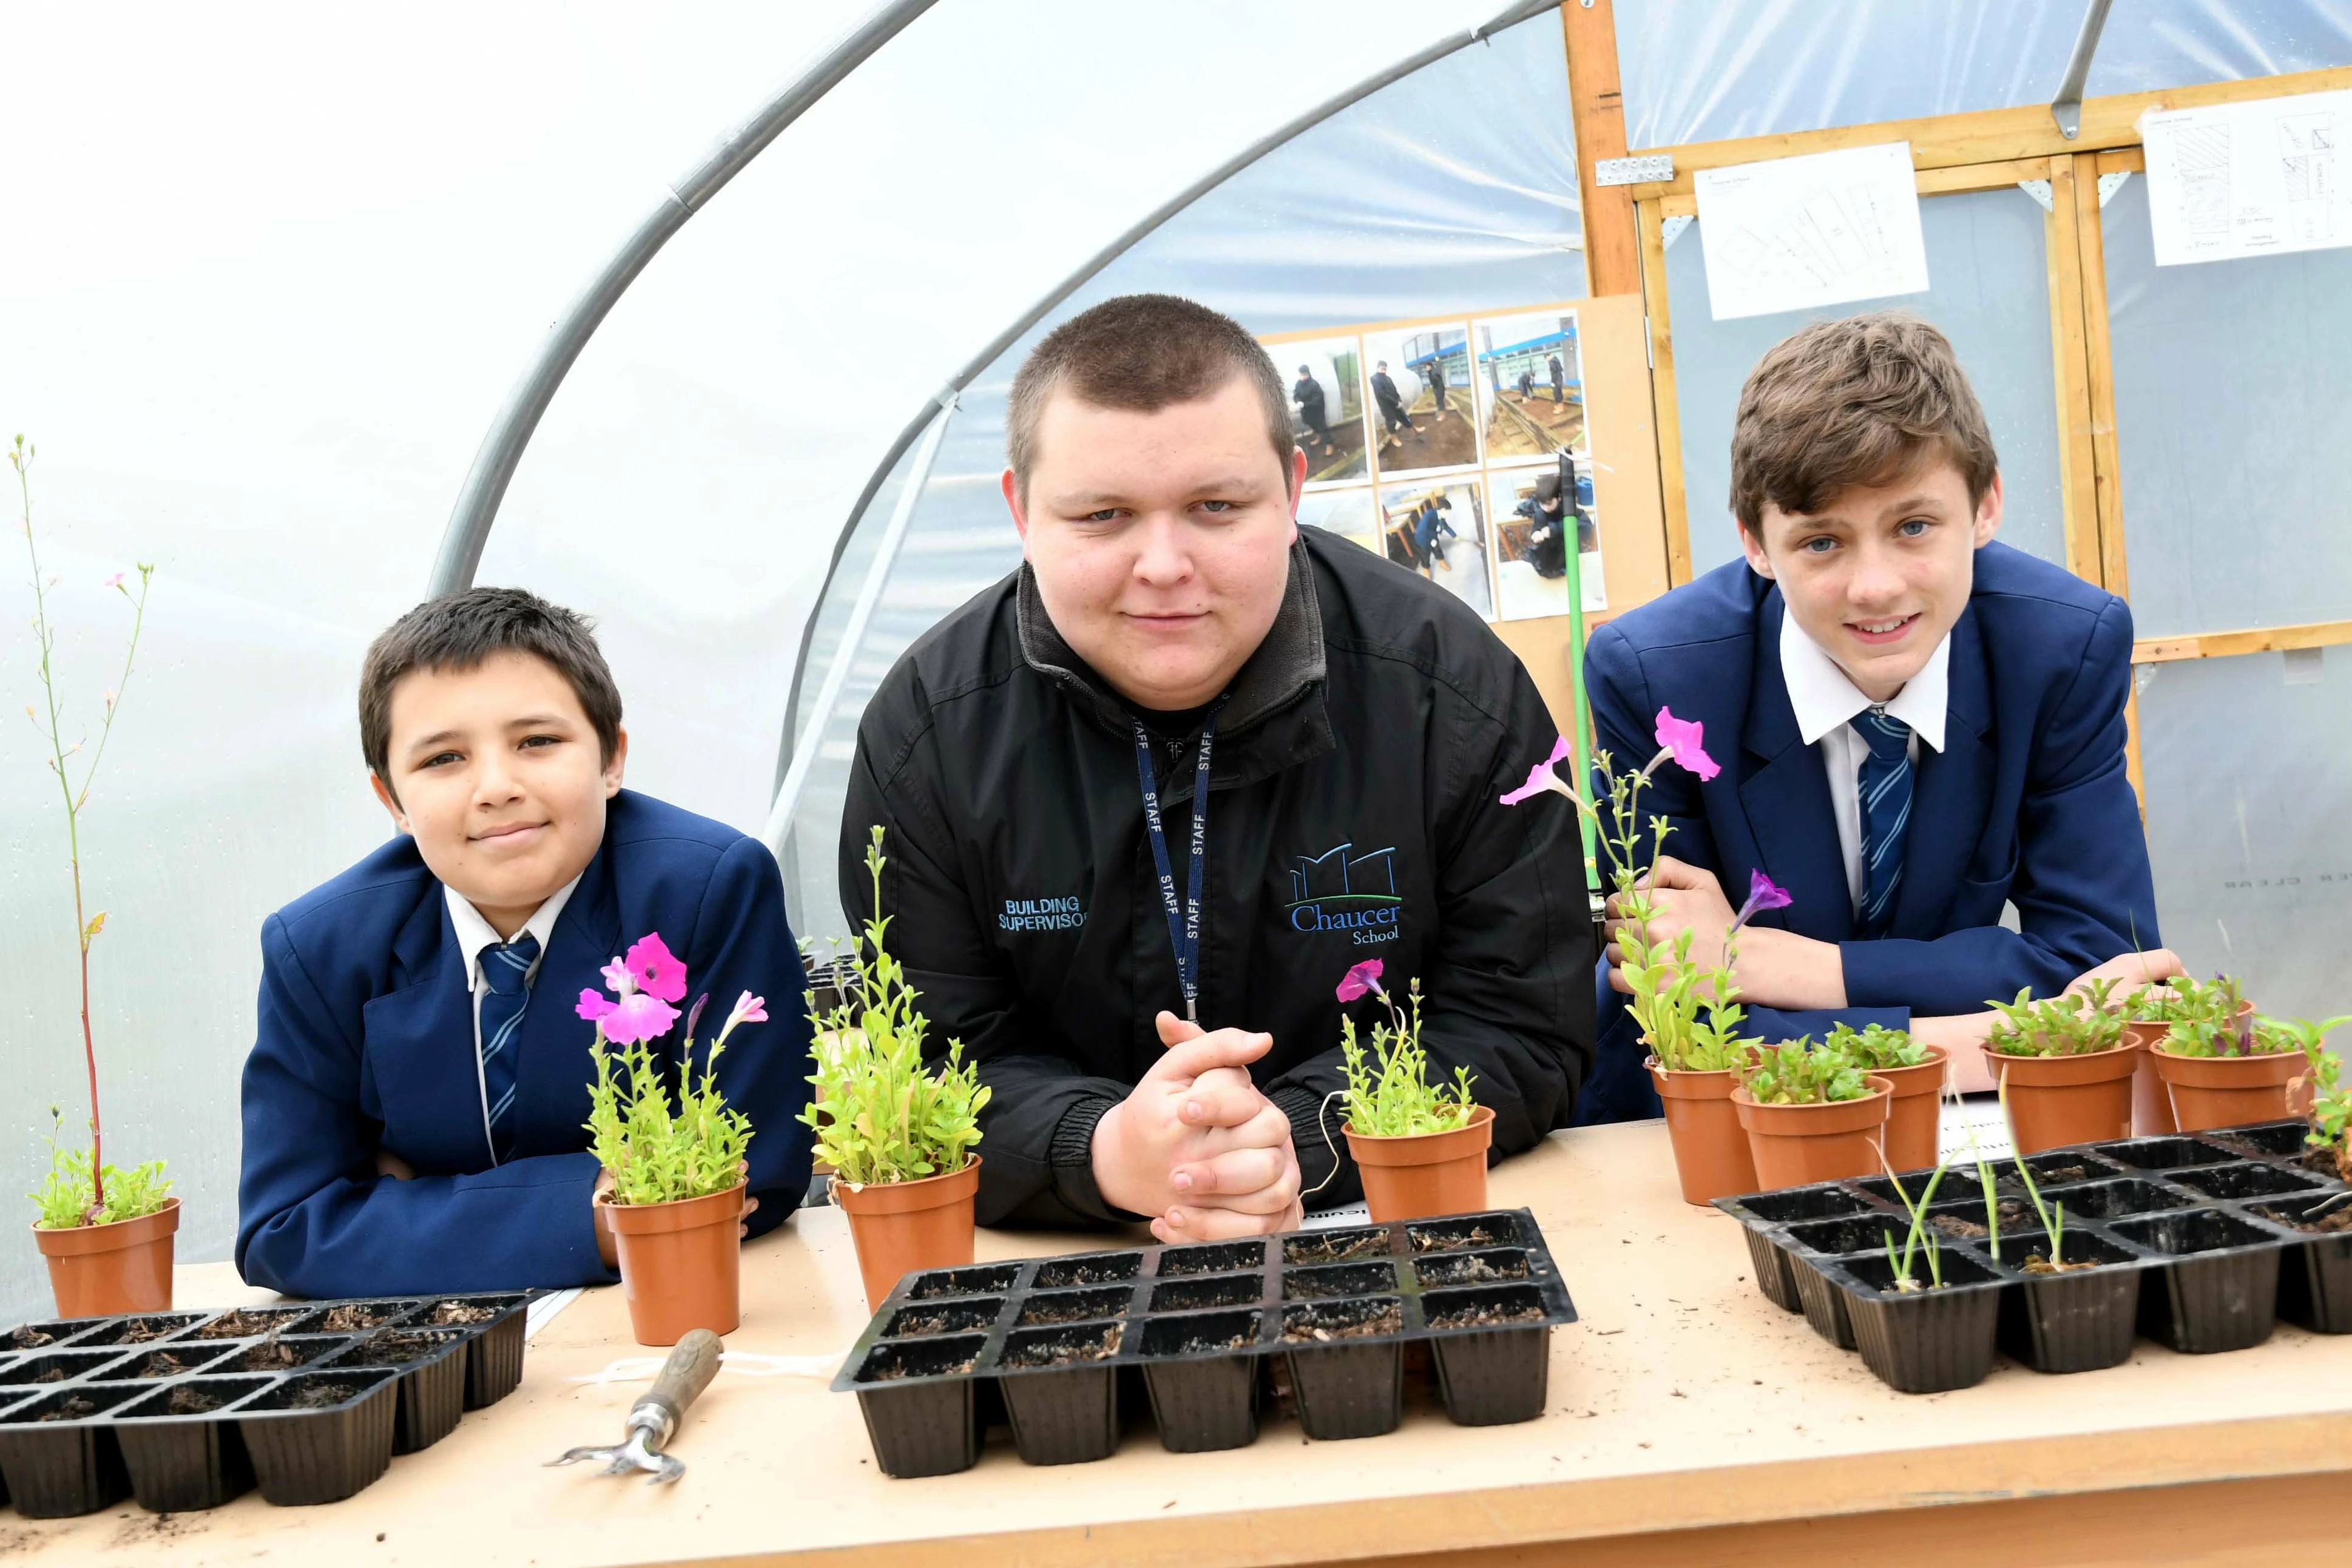 Hadyn Allen (centre), who works with the students on Chaucer School’s horticulture project, with Blaide Pearce (left) and Ciaran Ogden.